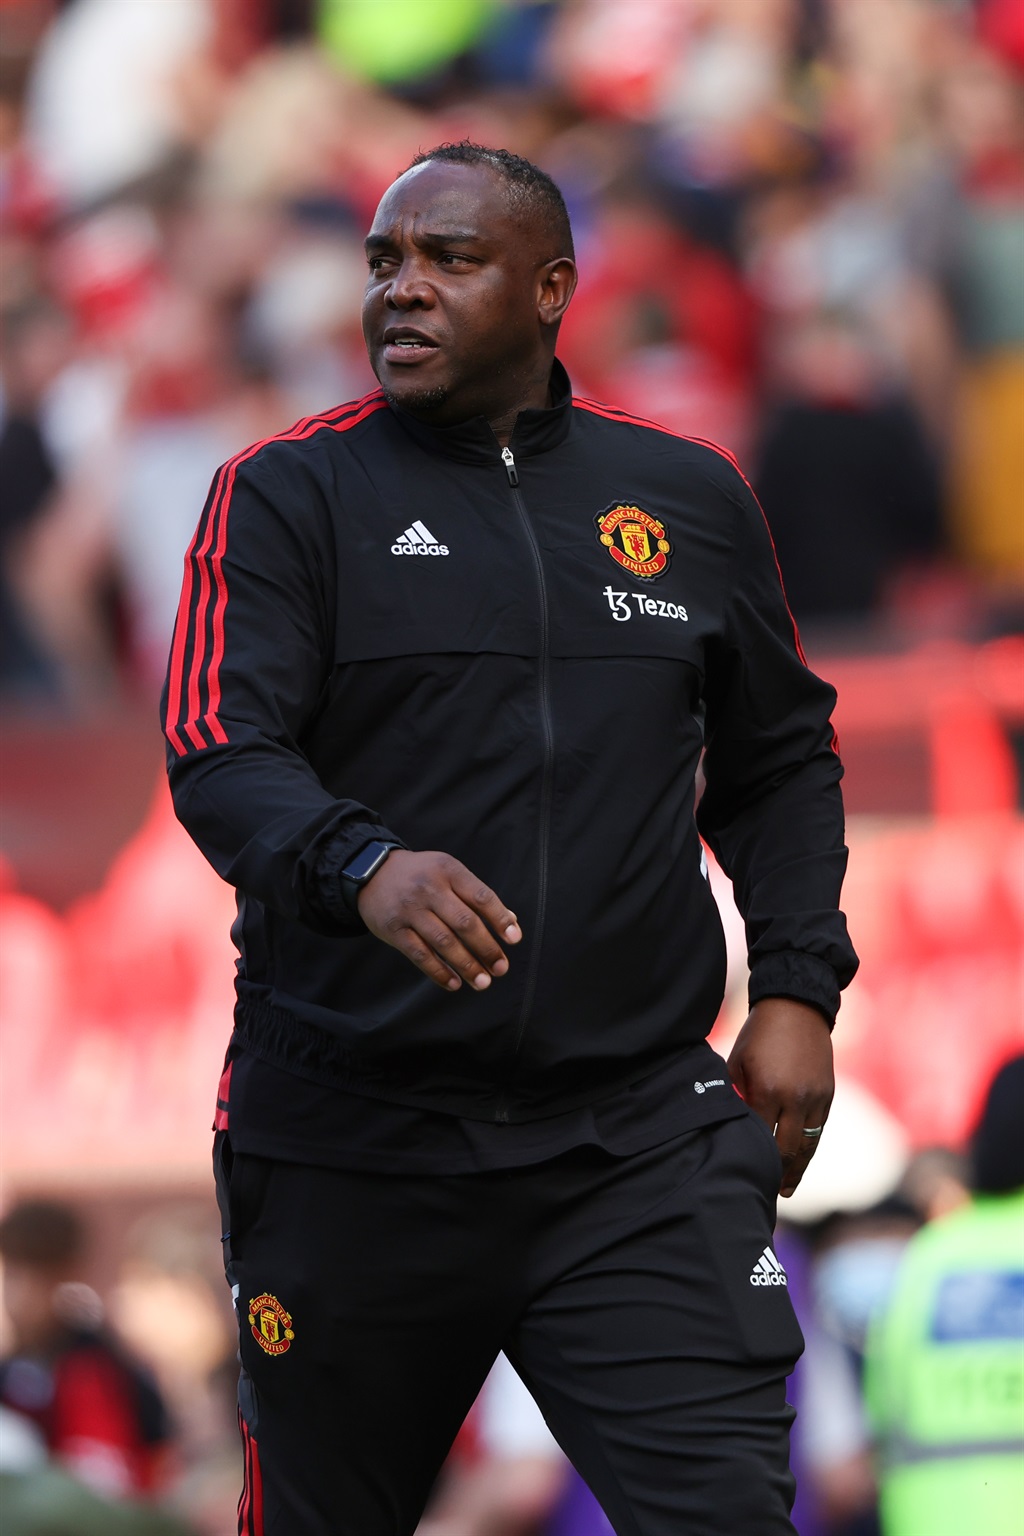 MANCHESTER, ENGLAND - JULY 31: Benni McCarthy  first-team coach at Manchester United during the pre-season friendly between Manchester United and Rayo Vallecano at Old Trafford on July 31, 2022 in Manchester, England. (Photo by Matthew Ashton - AMA/Getty Images)